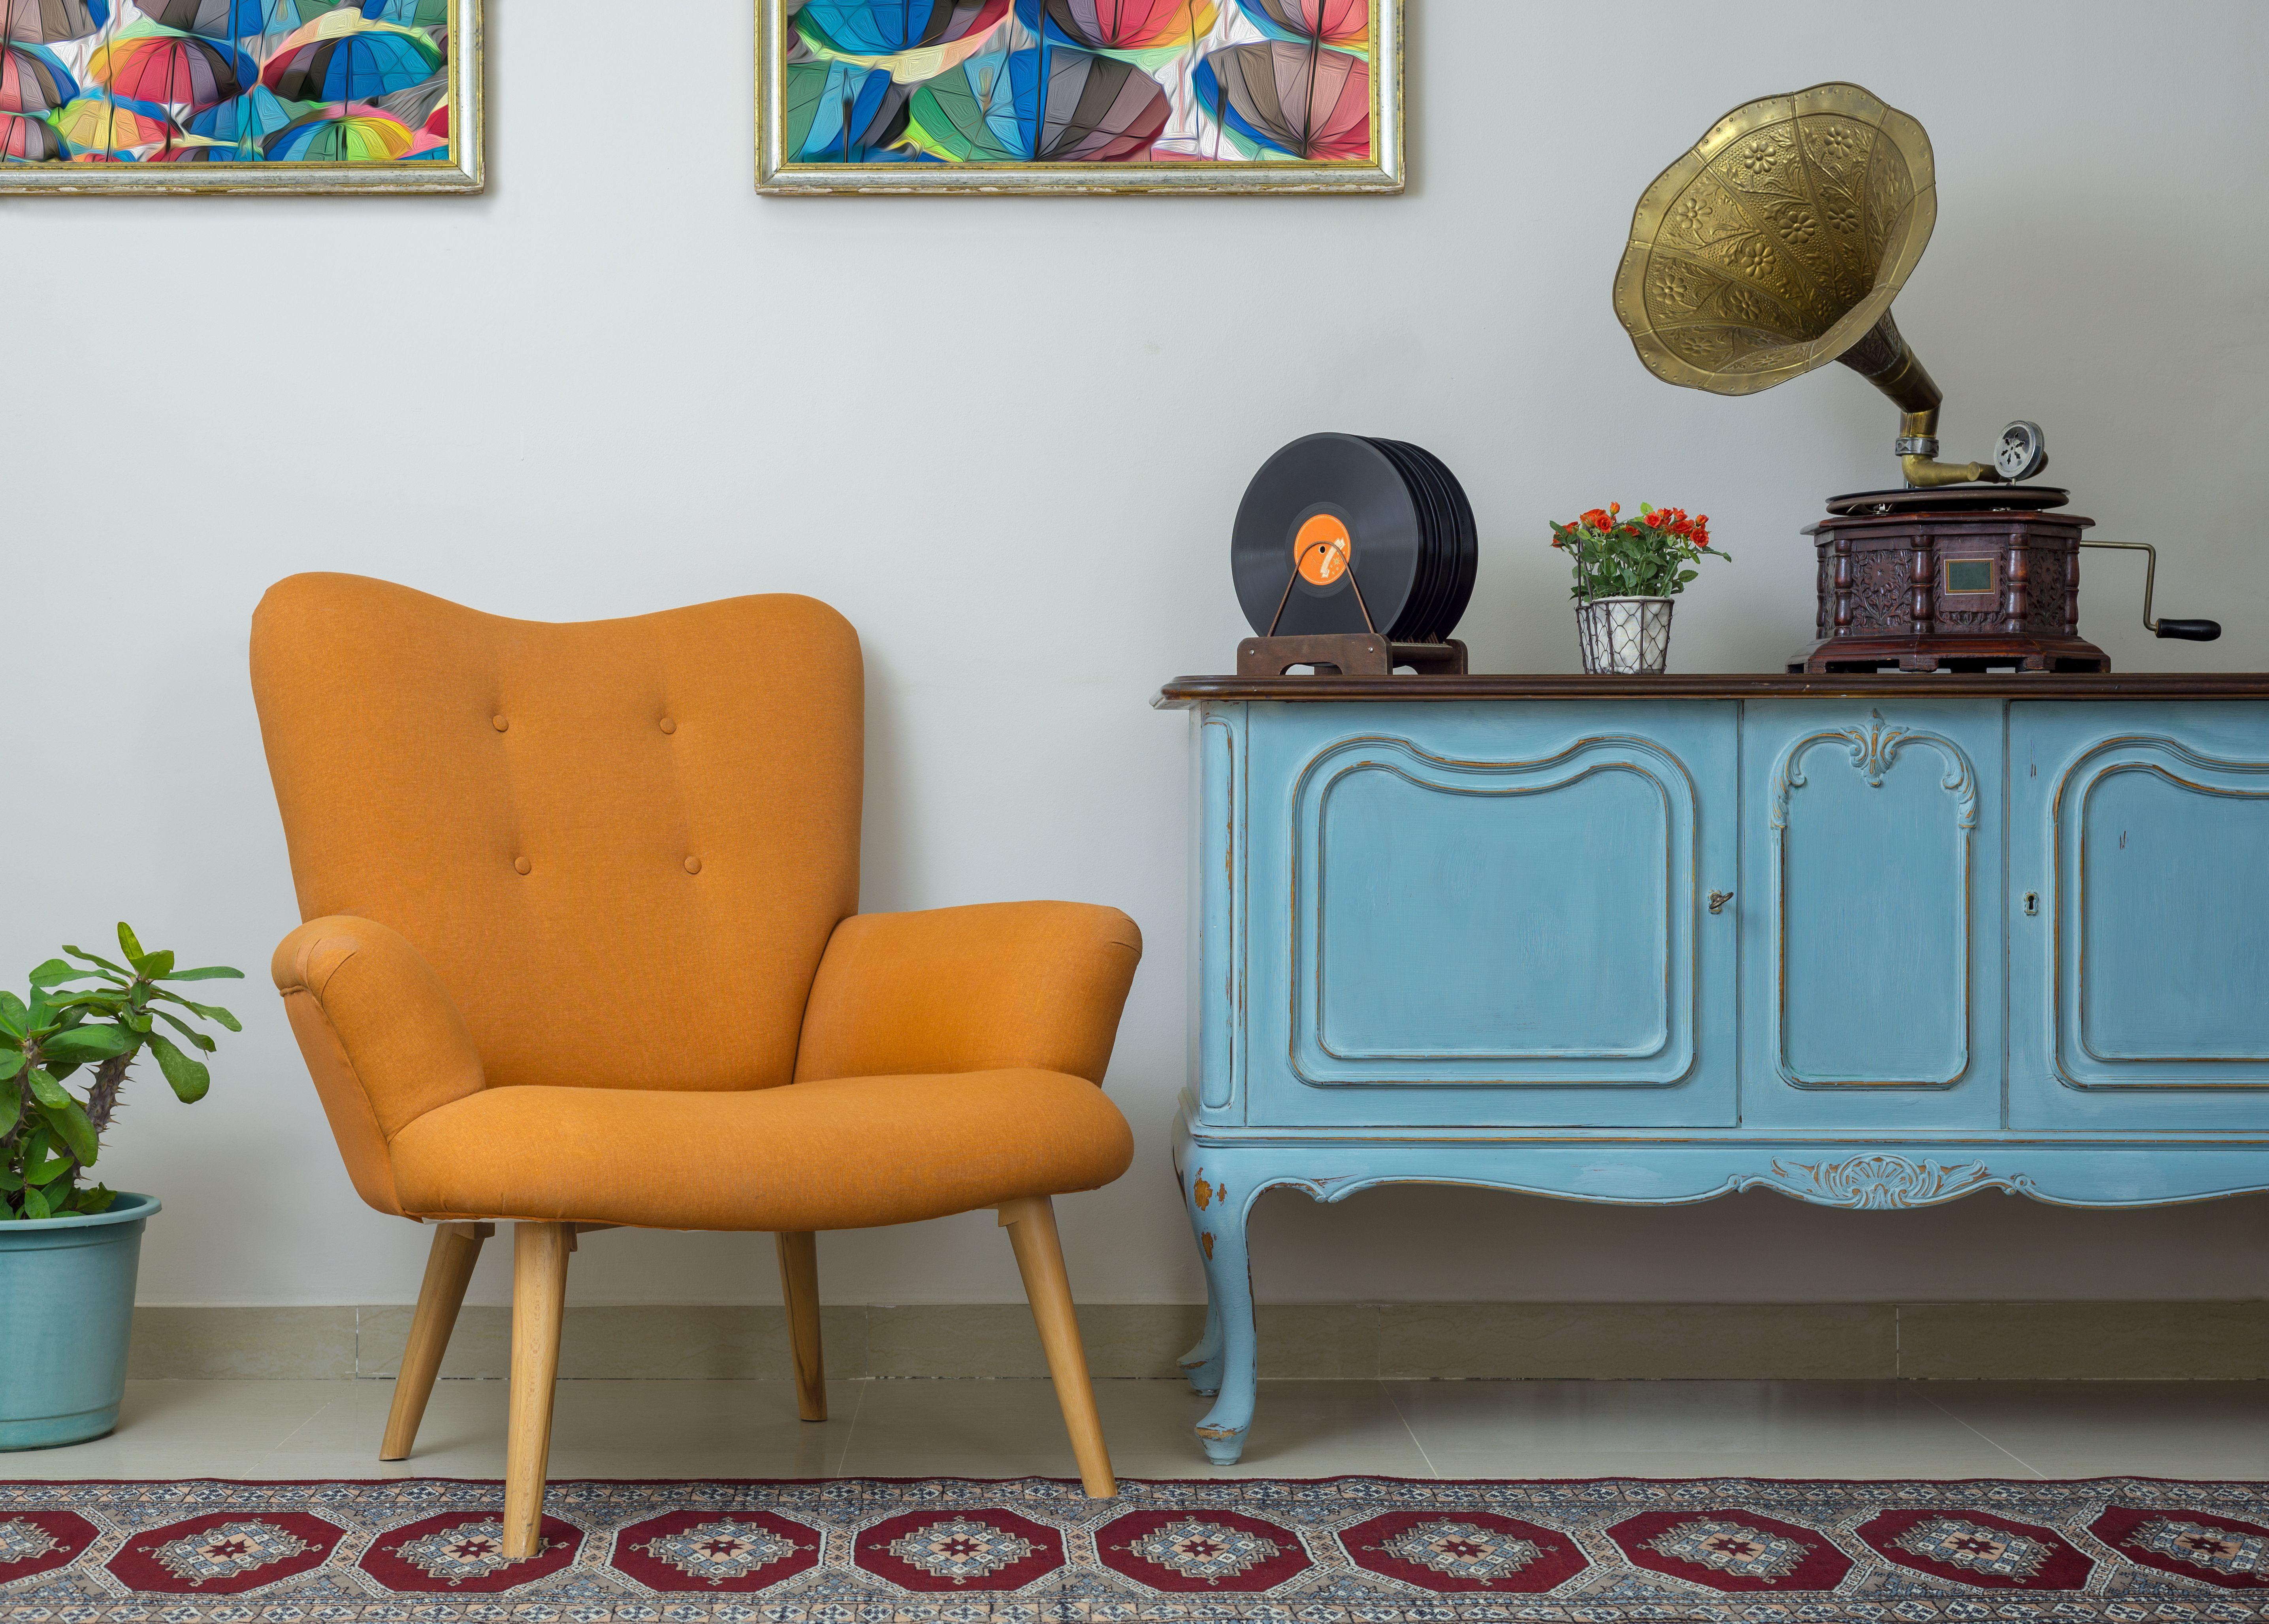 Retro orange armchair, vintage wooden light blue sideboard and old phonograph.